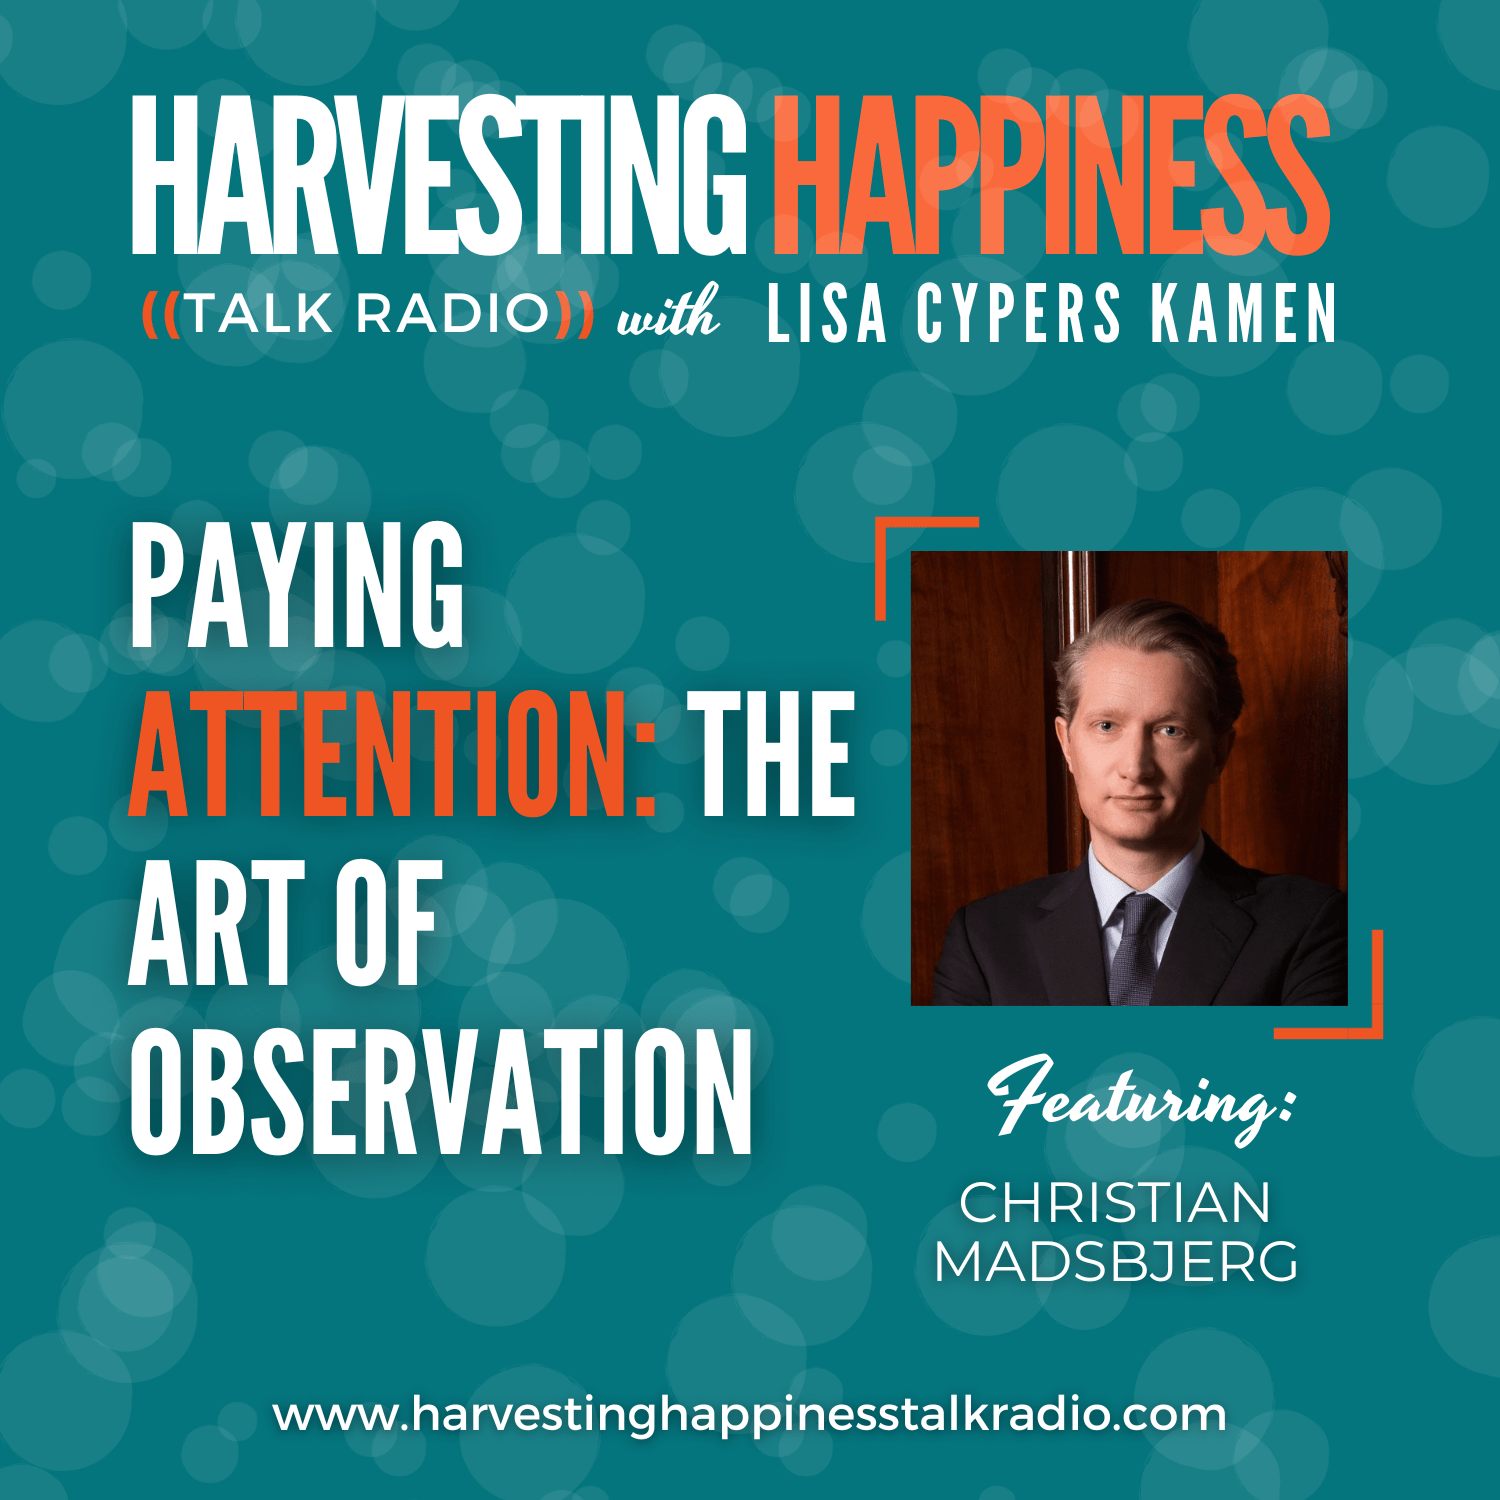 Christian Madsbjerg PhD HHTR podcast about paying attention